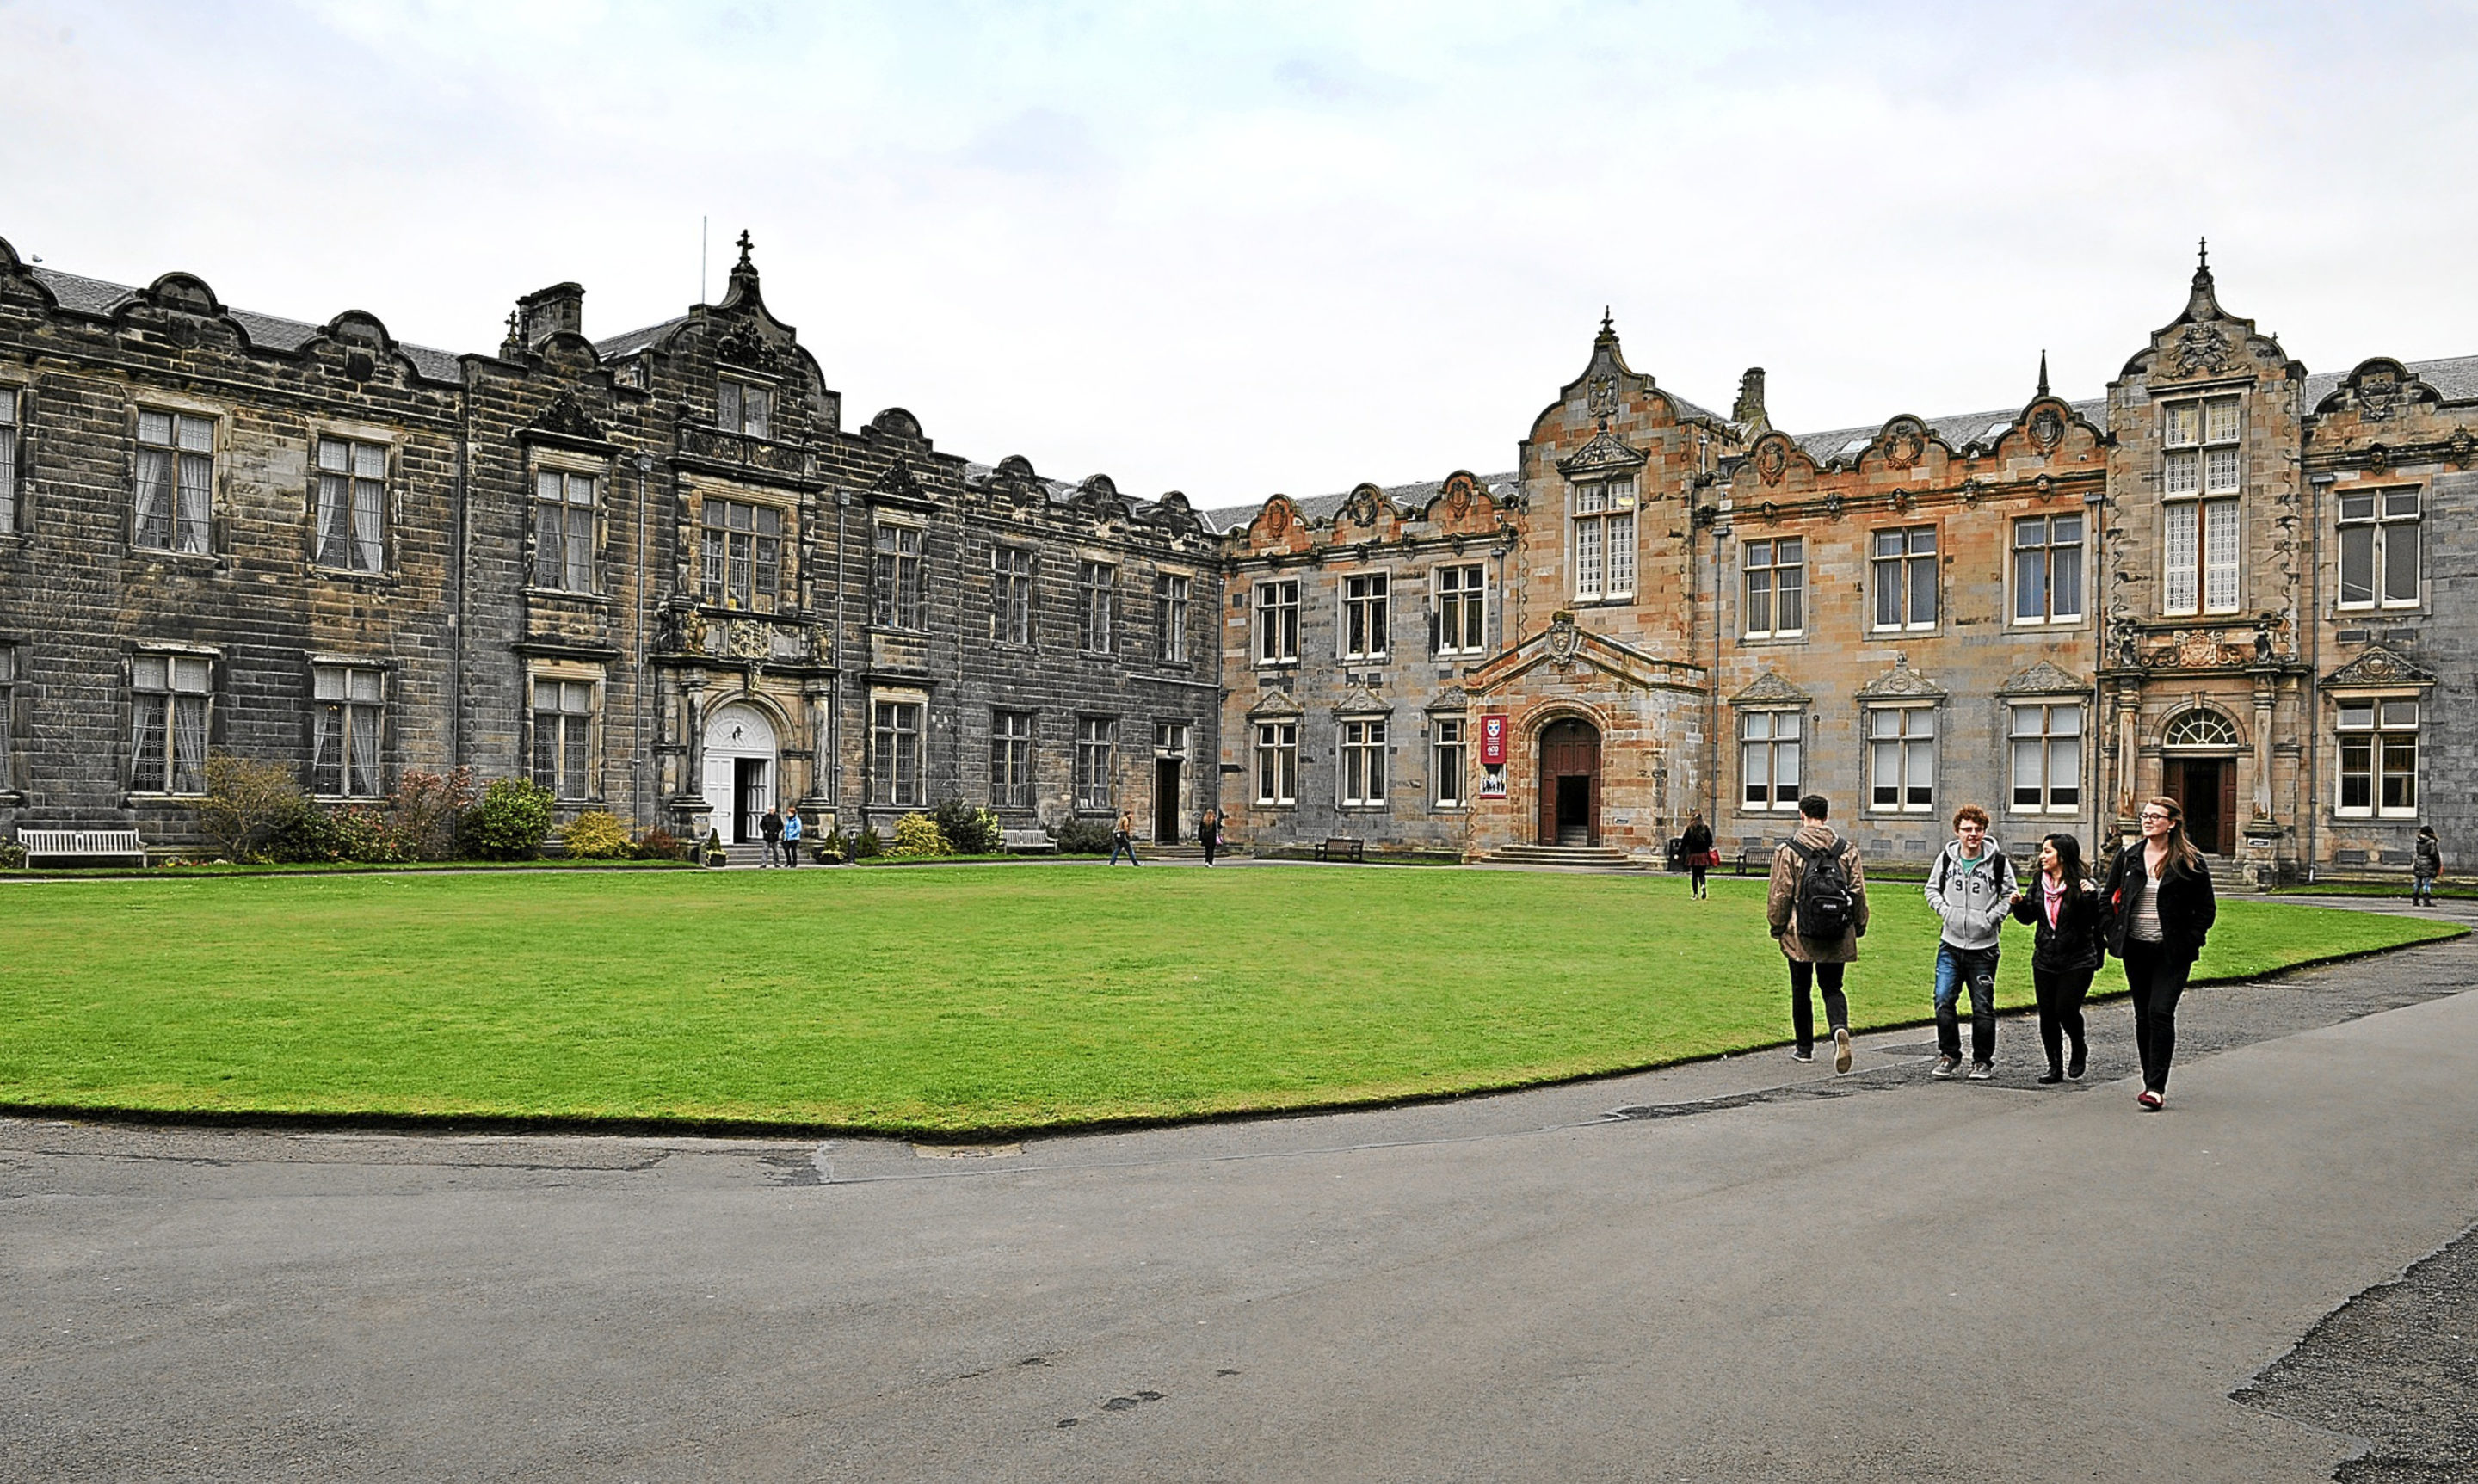 Research was conducted at the University of St Andrews